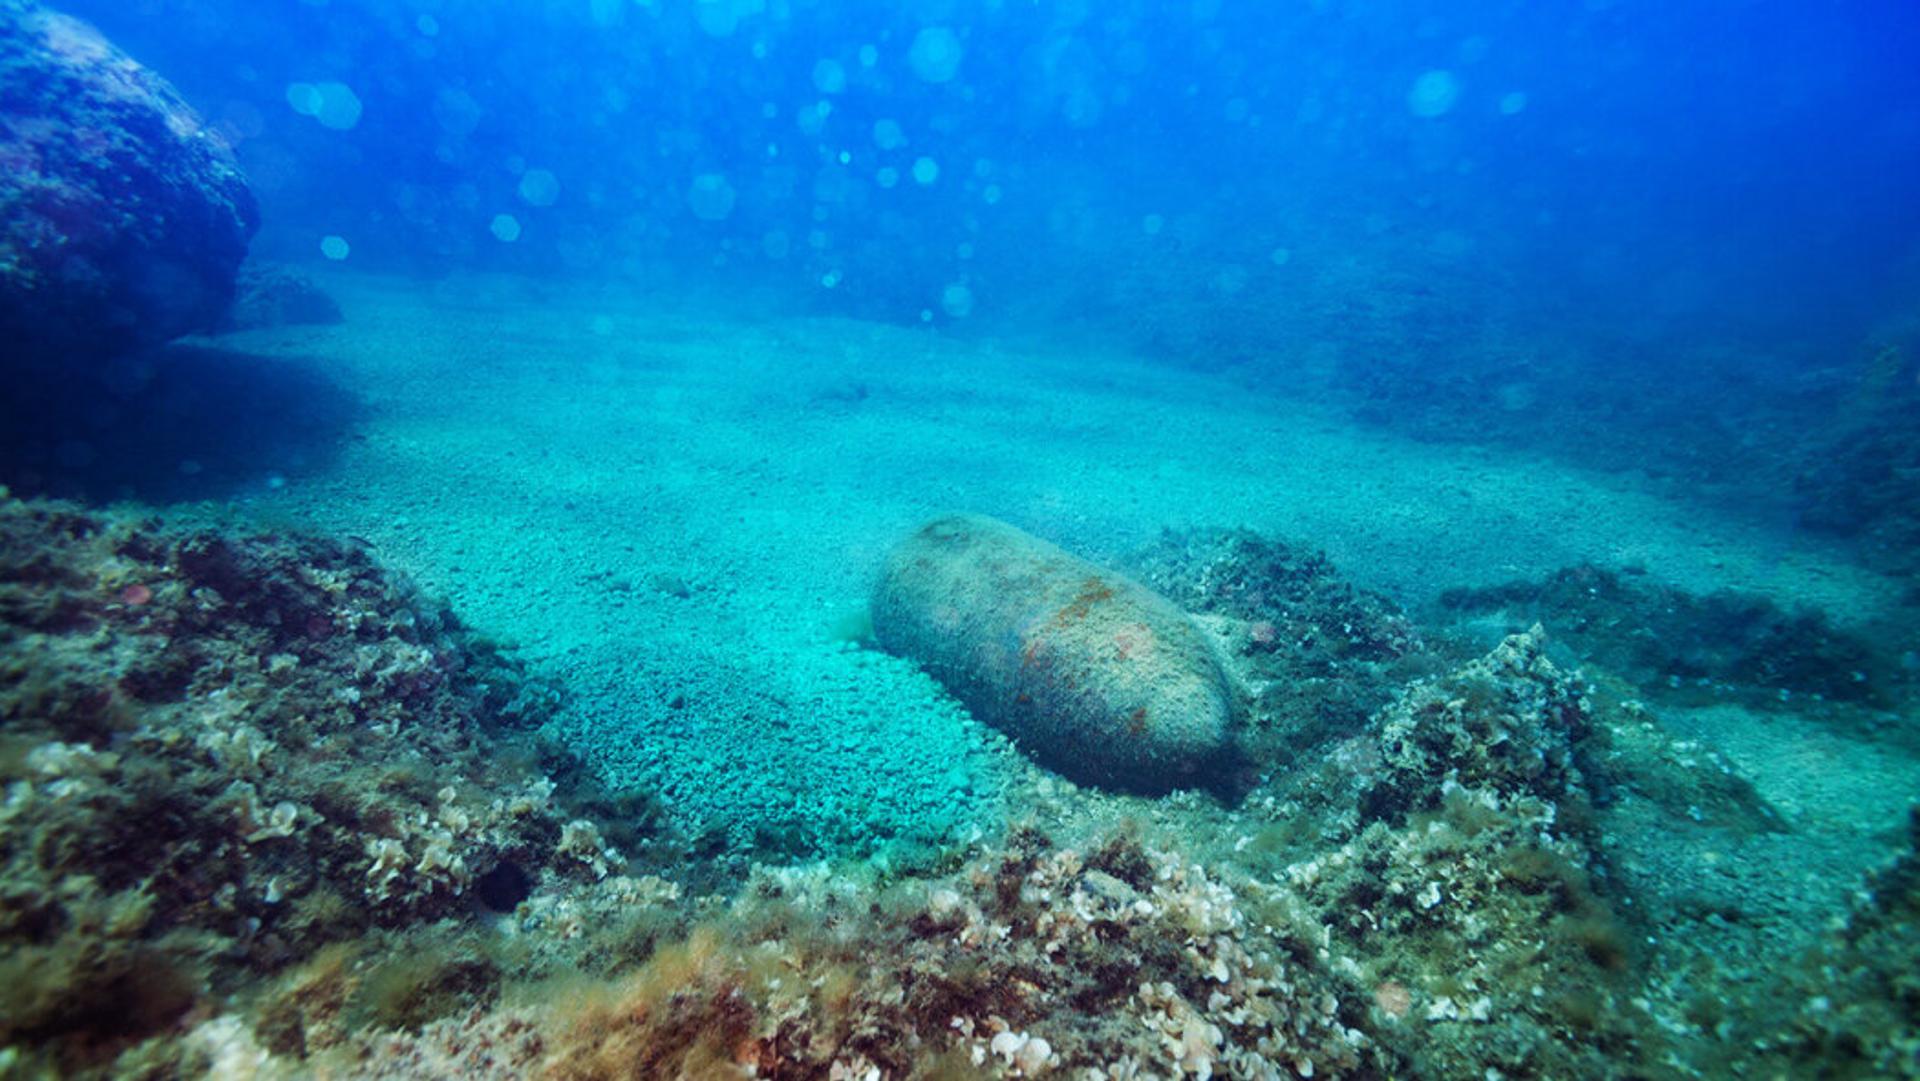 Unexploded munitions on the seabed